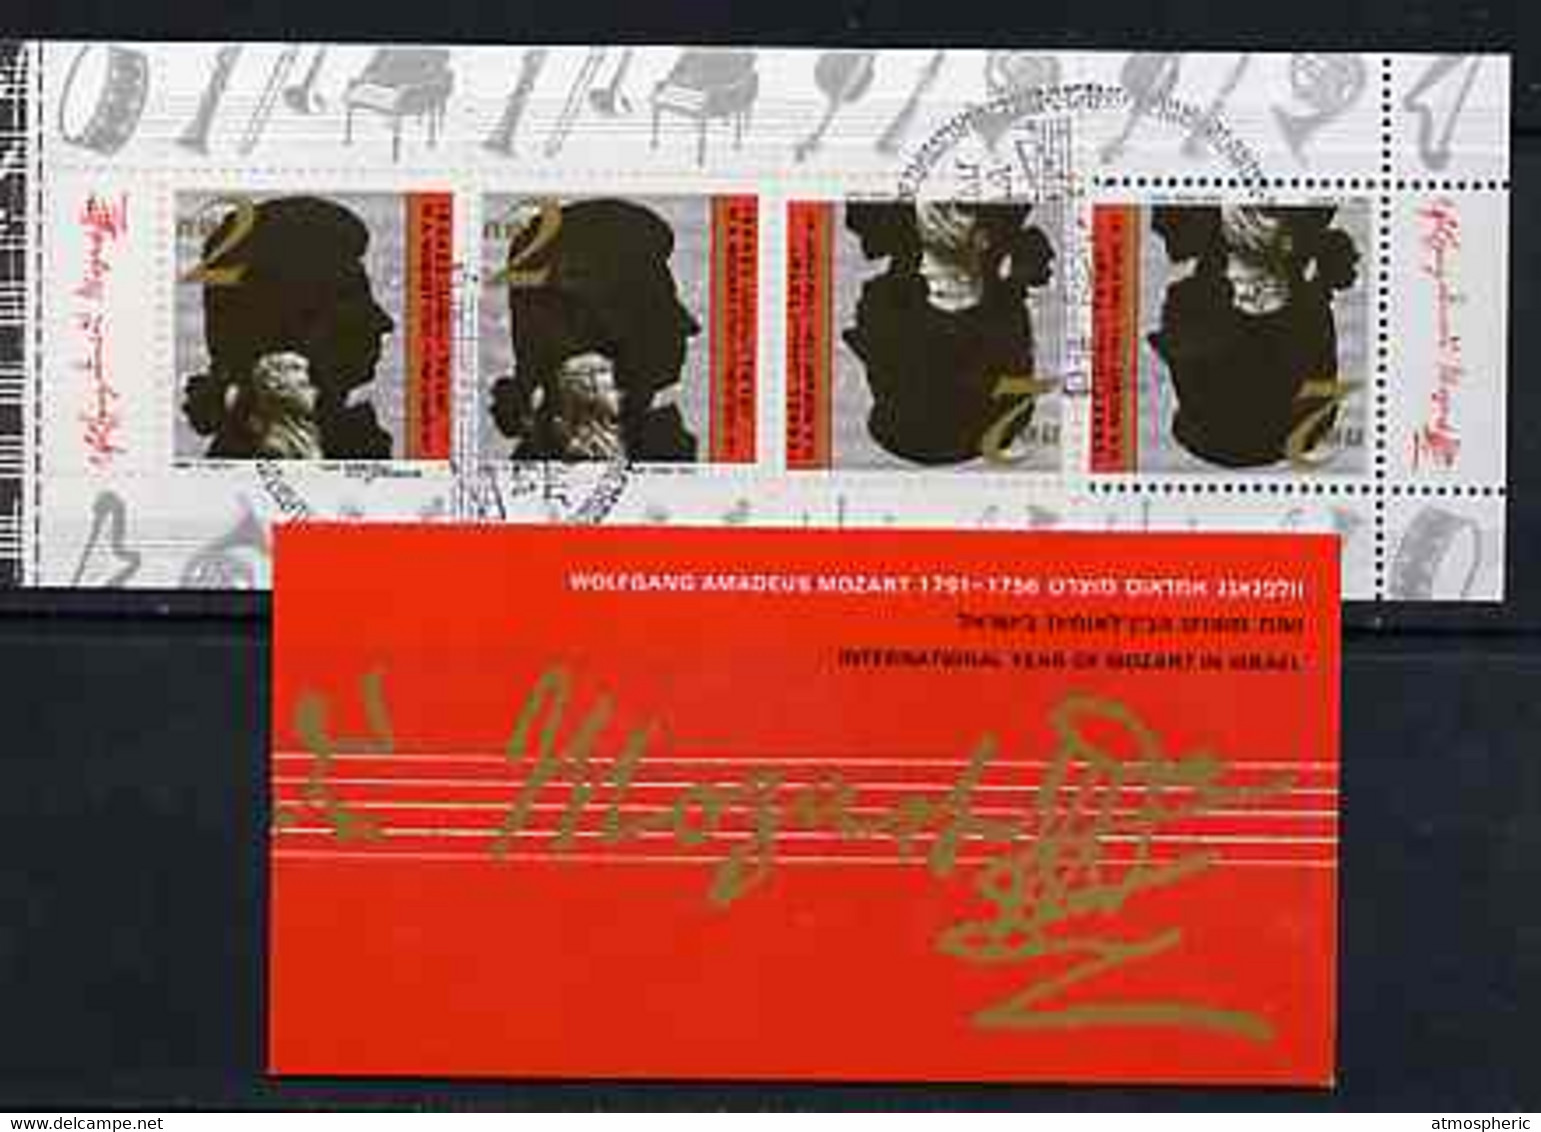 Booklet - Israel 1991 Mozart 8s Booklet (tete-beche Pane) Complete With First Day Commemorative Cancels, SG SB22 - Carnets